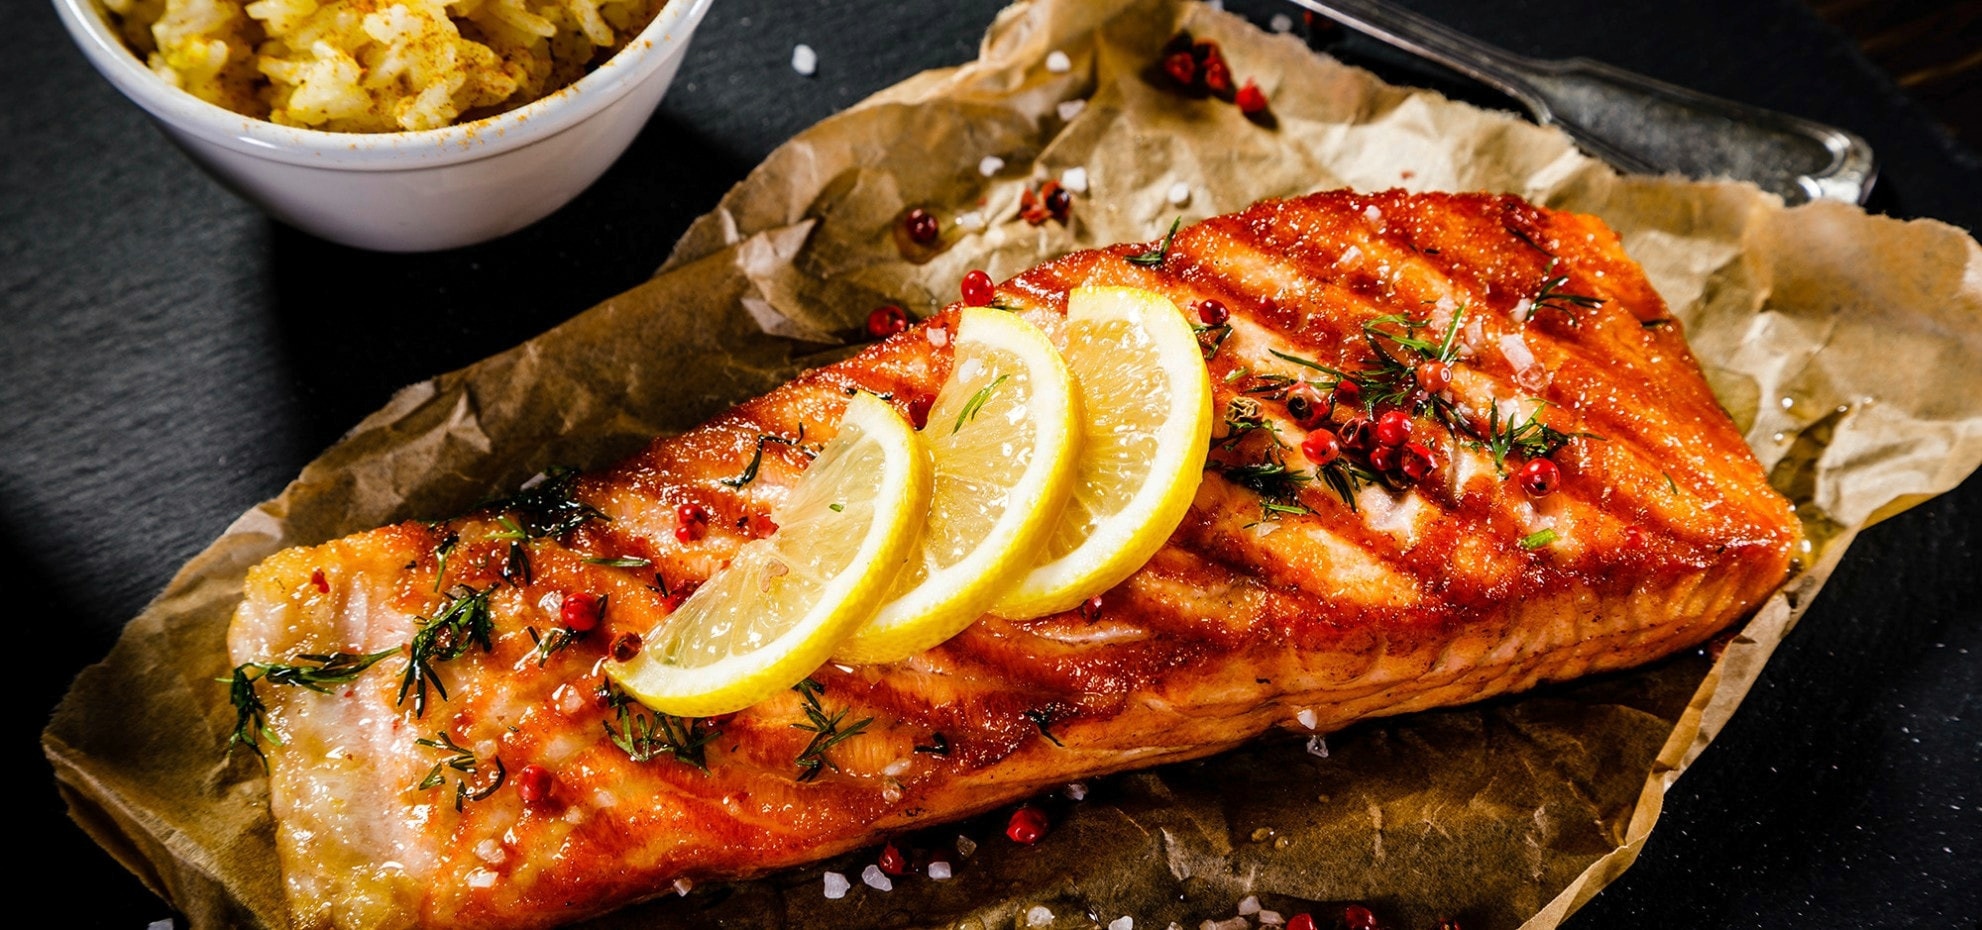 Grilled salmon with lemon slices on a baking dish lined with parchment paper